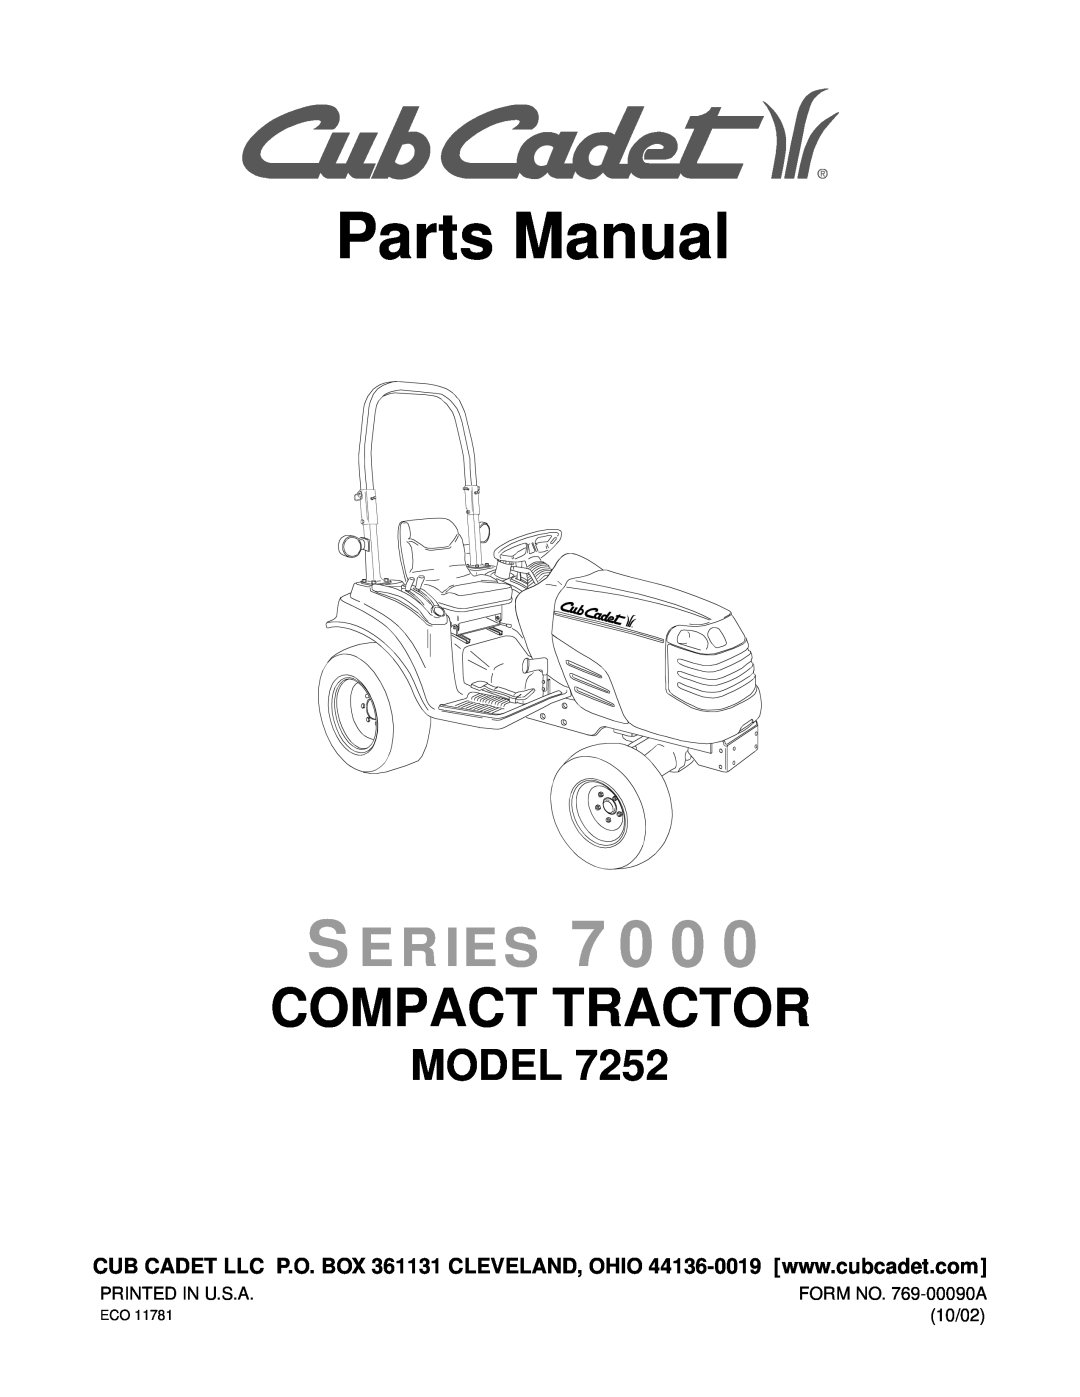 MTD 7252 manual Printed In U.S.A, FORM NO. 769-00090A, 10/02, Parts Manual, Series, Compact Tractor, Model 